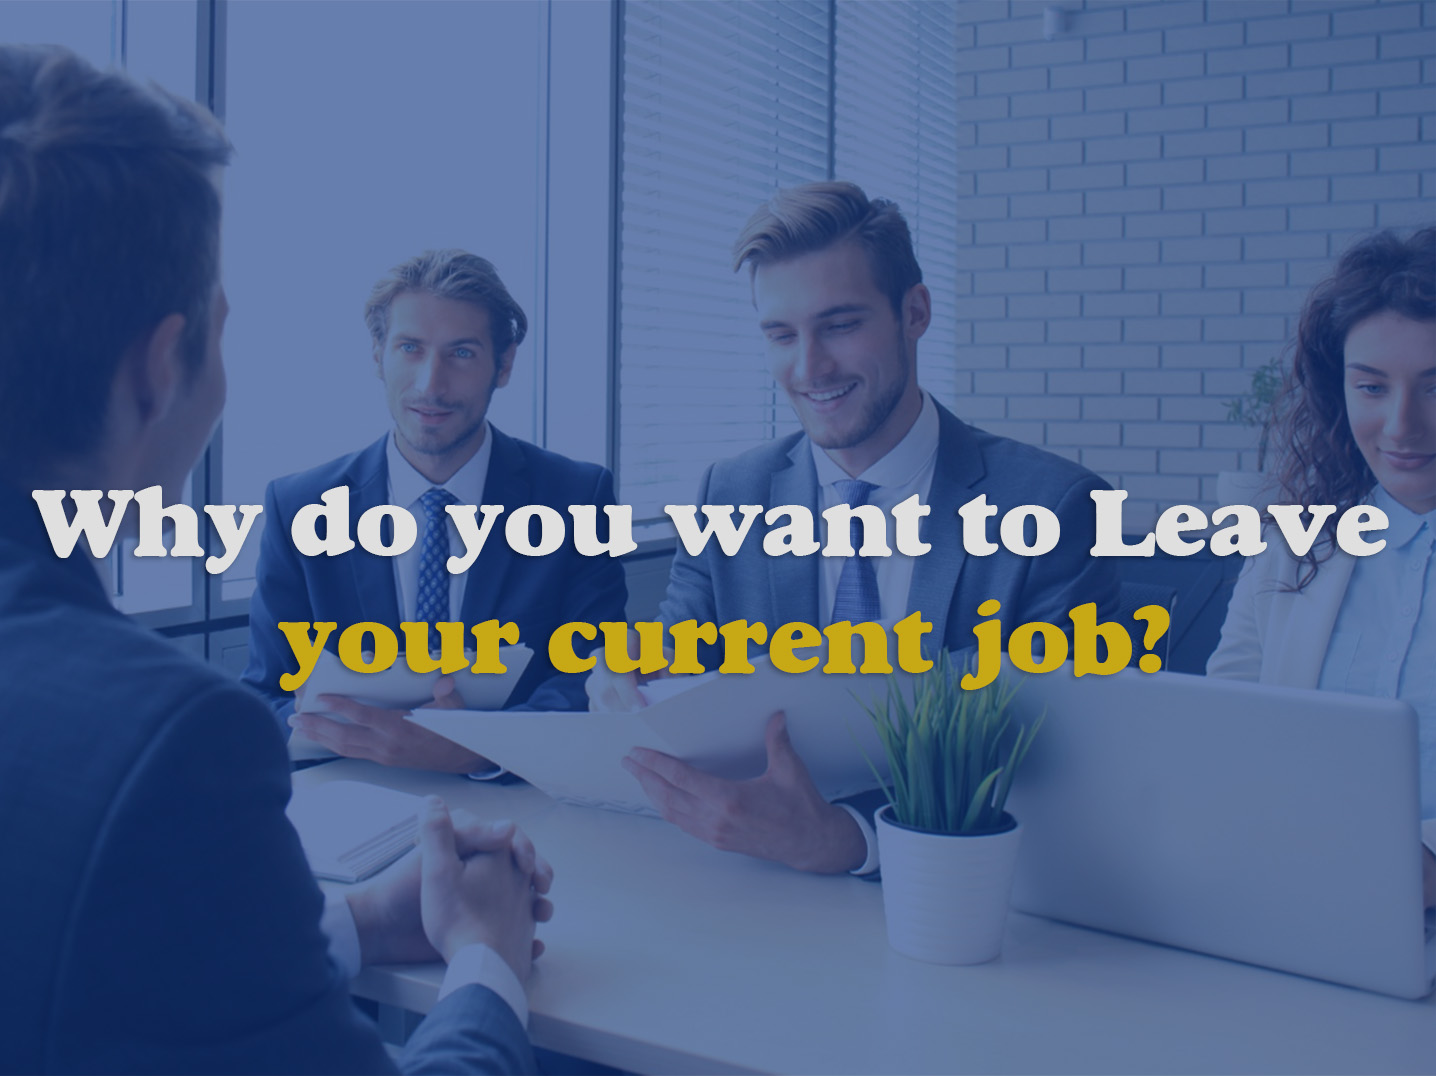 Why do you want to Leave your current job- Best answer you can give